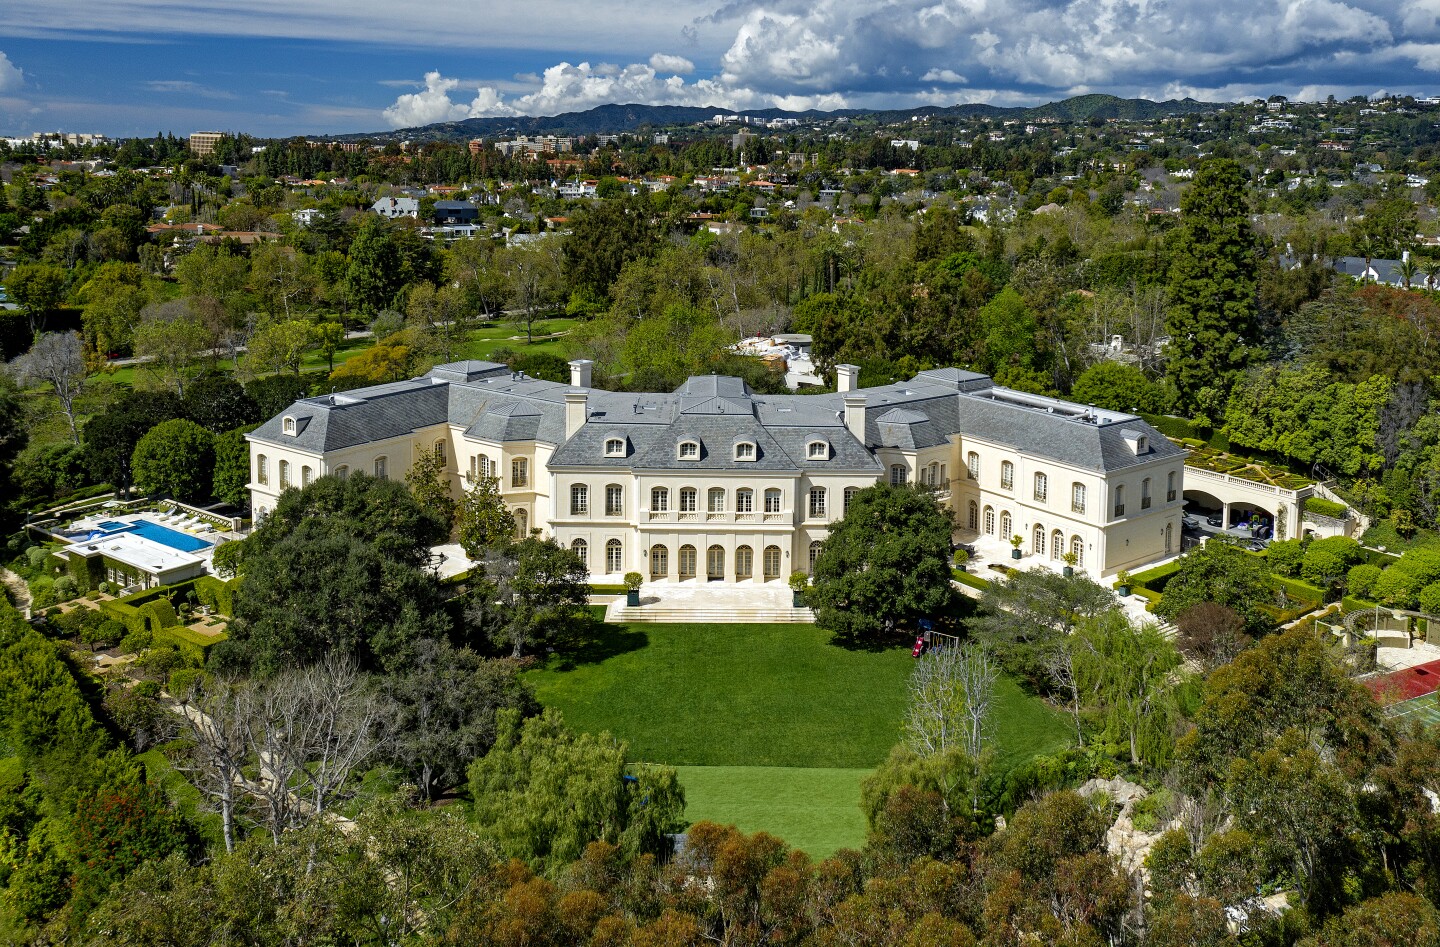 The sale of the Manor in Holmby Hills pushed L.A. County's price record to $120 million. The property now holds the record for most expensive sale in Los Angeles but also California.